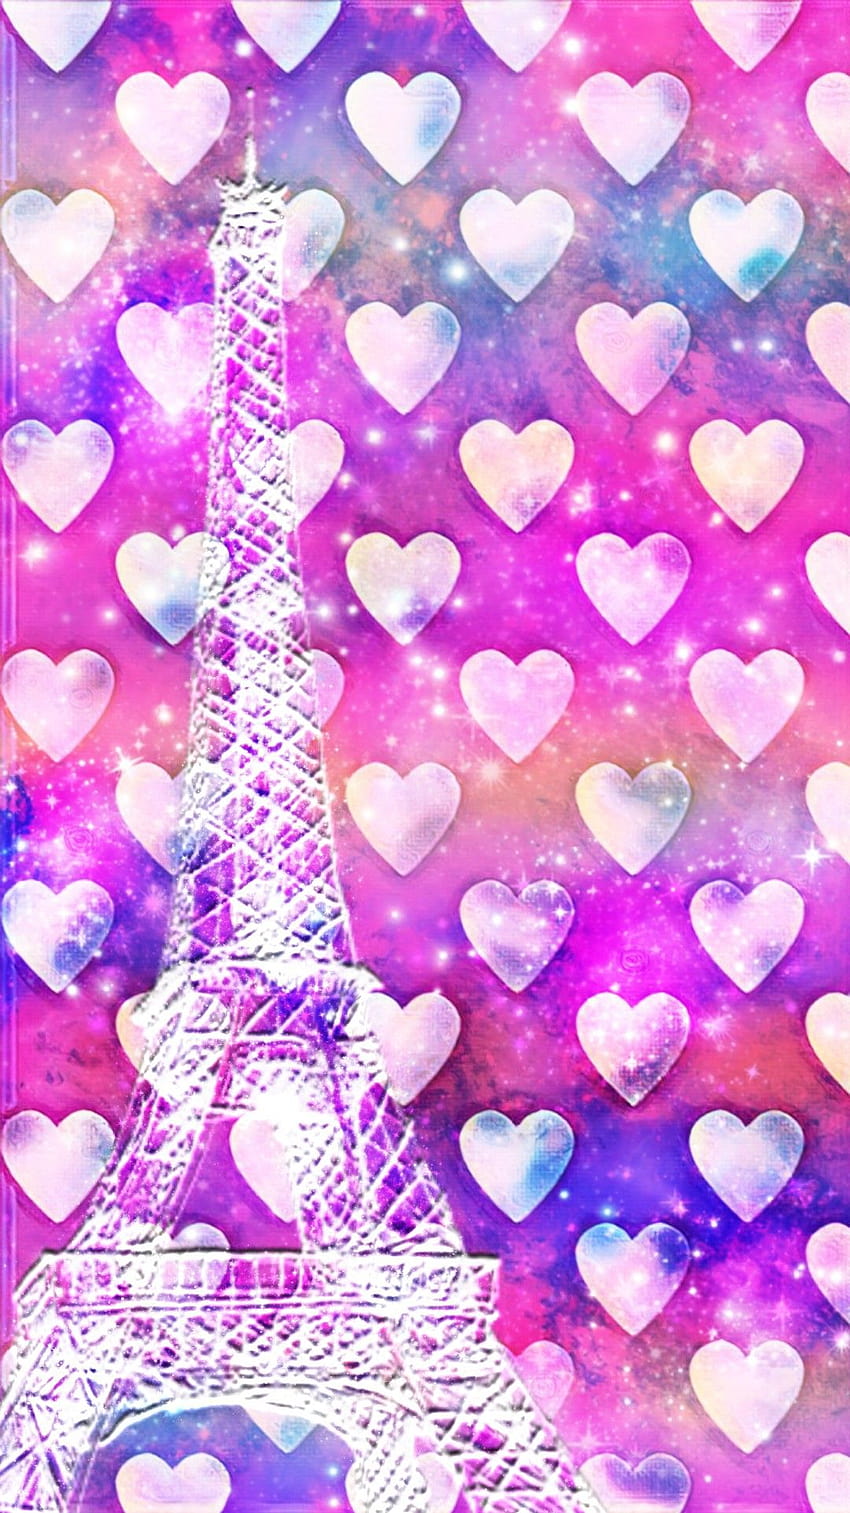 Lovely Hearts Paris, made by me, valentines day pink glitter HD phone wallpaper